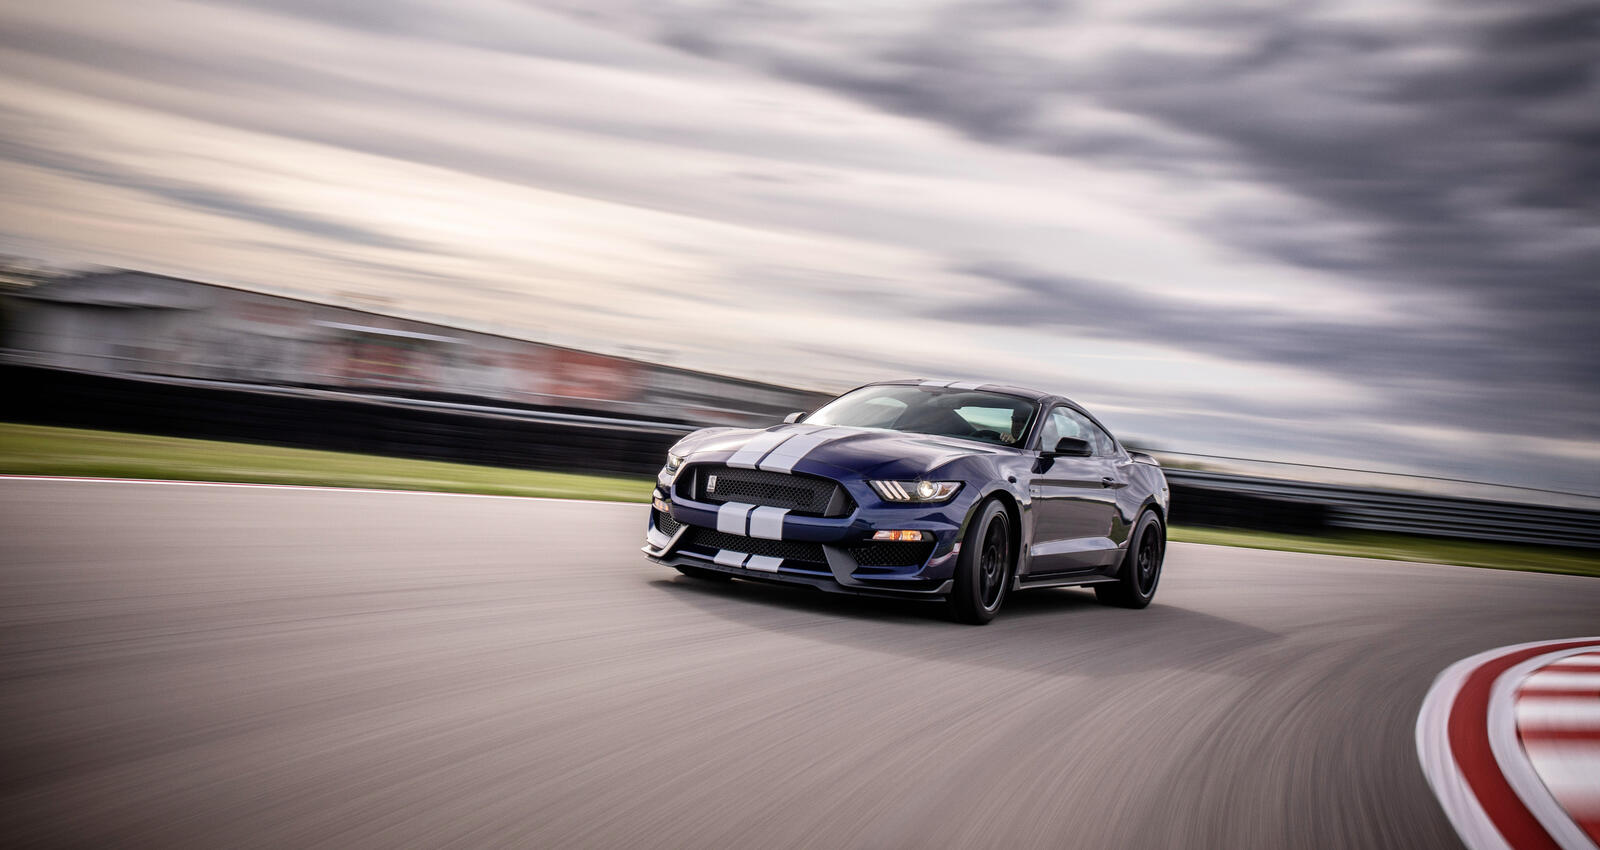 Wallpapers Ford Mustang Shelby Ford on the desktop